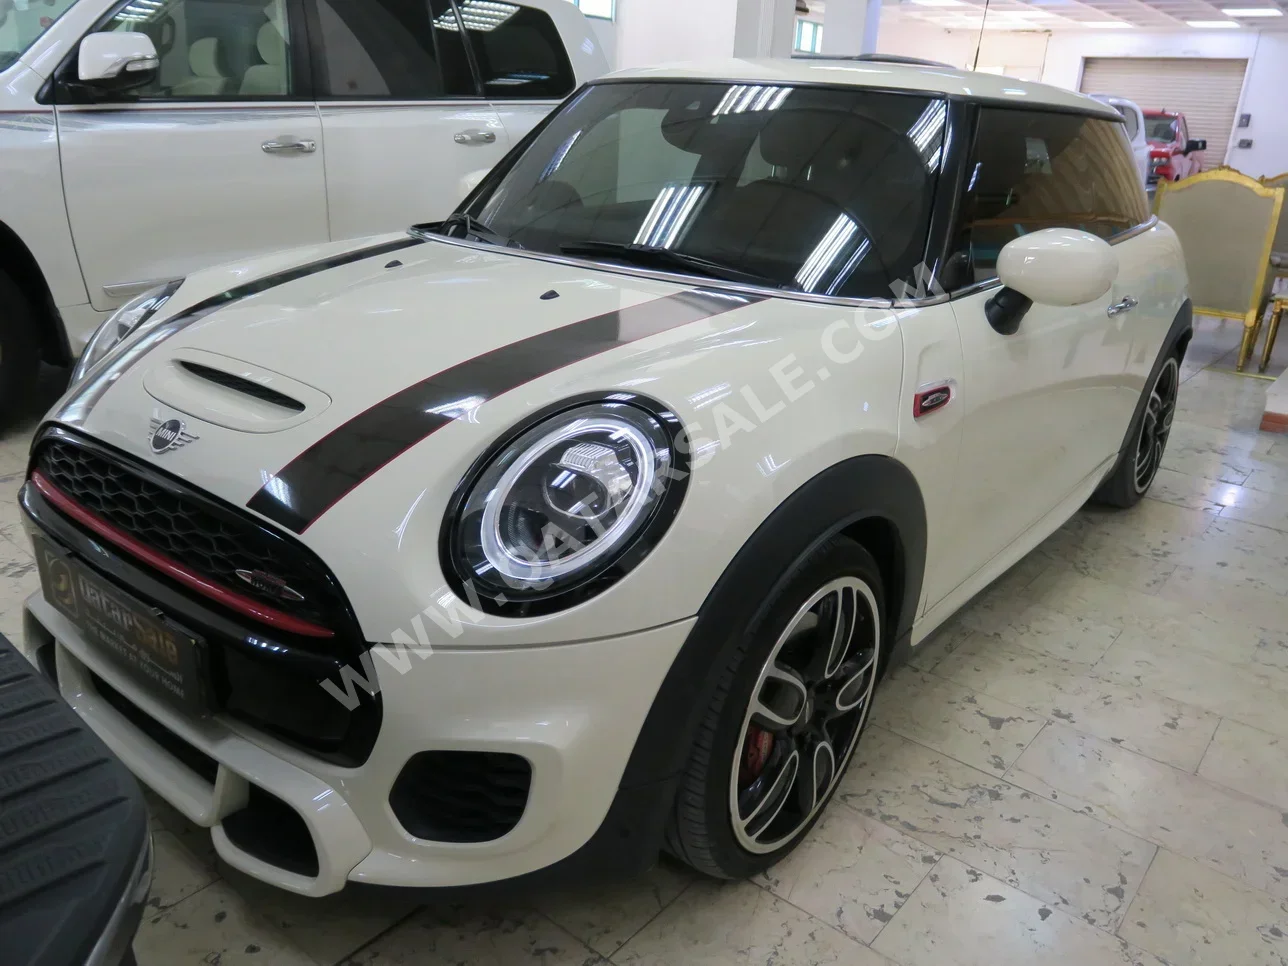 Mini  Cooper  JCW  2021  Automatic  18,000 Km  4 Cylinder  Front Wheel Drive (FWD)  Coupe / Sport  White  With Warranty